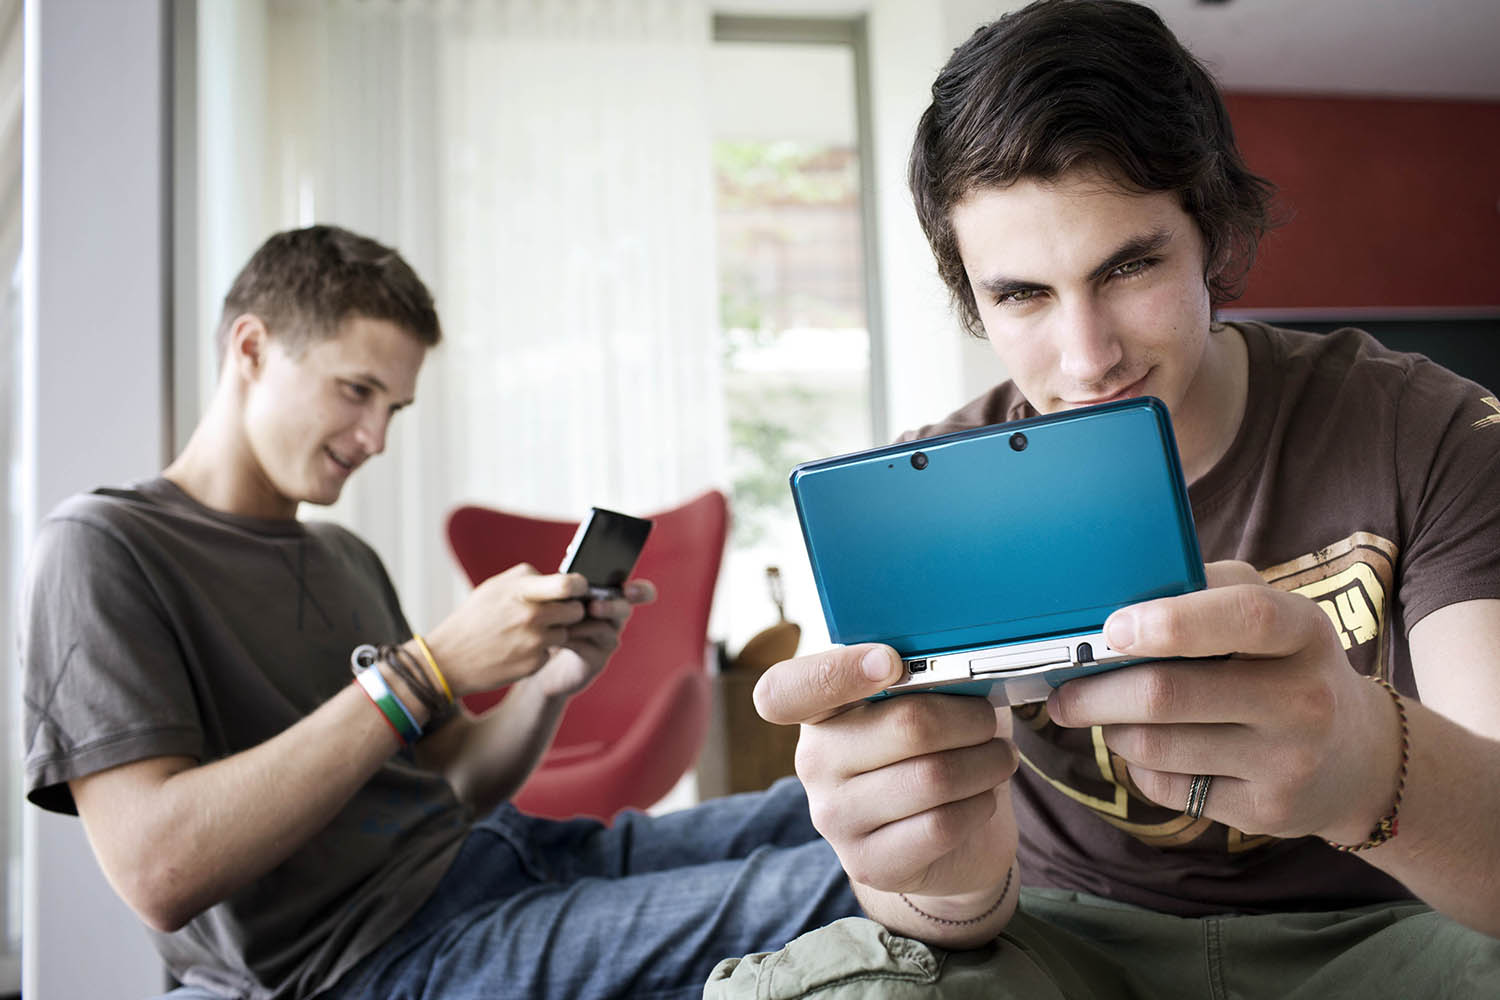 Nintendo to bring 3DS eShop to PCs and mobiles